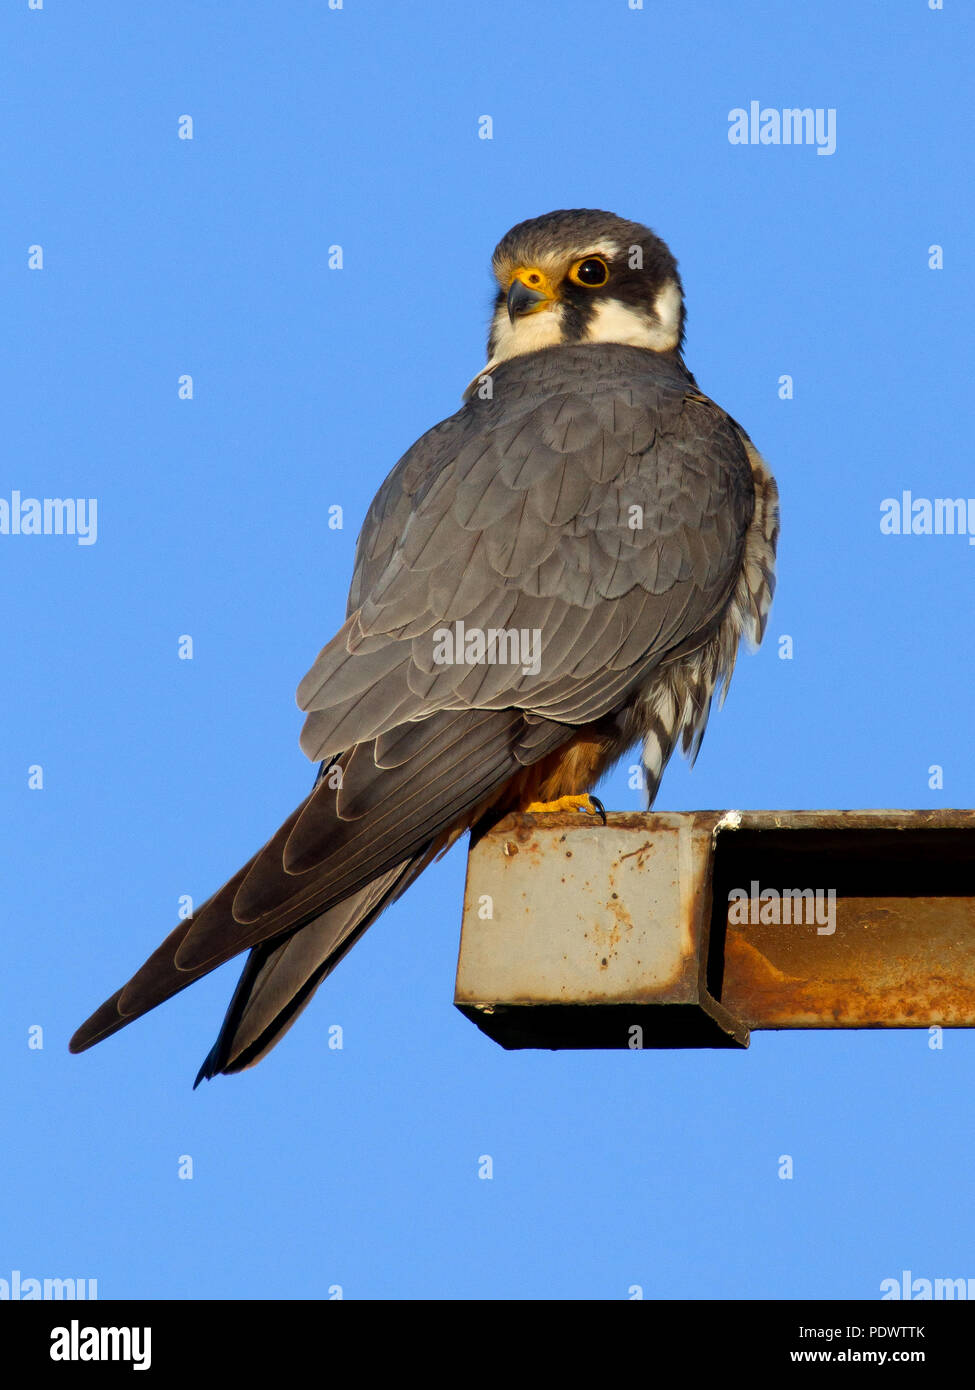 Adult Hobby in high tension pilon against a blue sky. Stock Photo